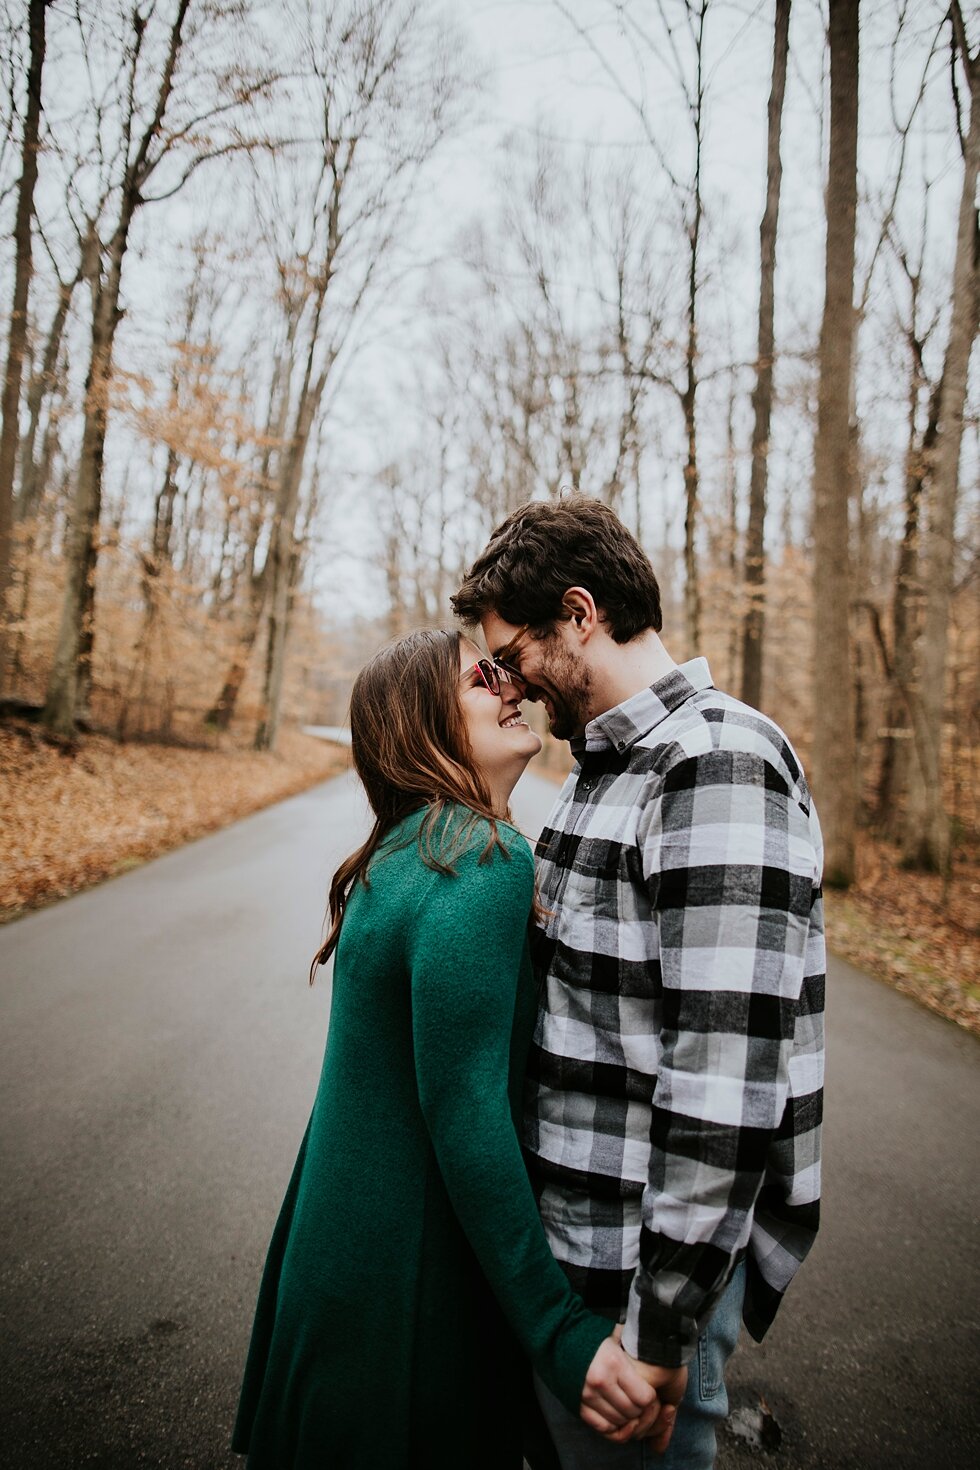  Stunning emerald green dress worn during rainy winter engagement and save the date photography session. Louisville photographer winter engagement Bernheim Forest emerald green dress plaid shirt rainy day Kentucky couple outdoor engagement  #savethed